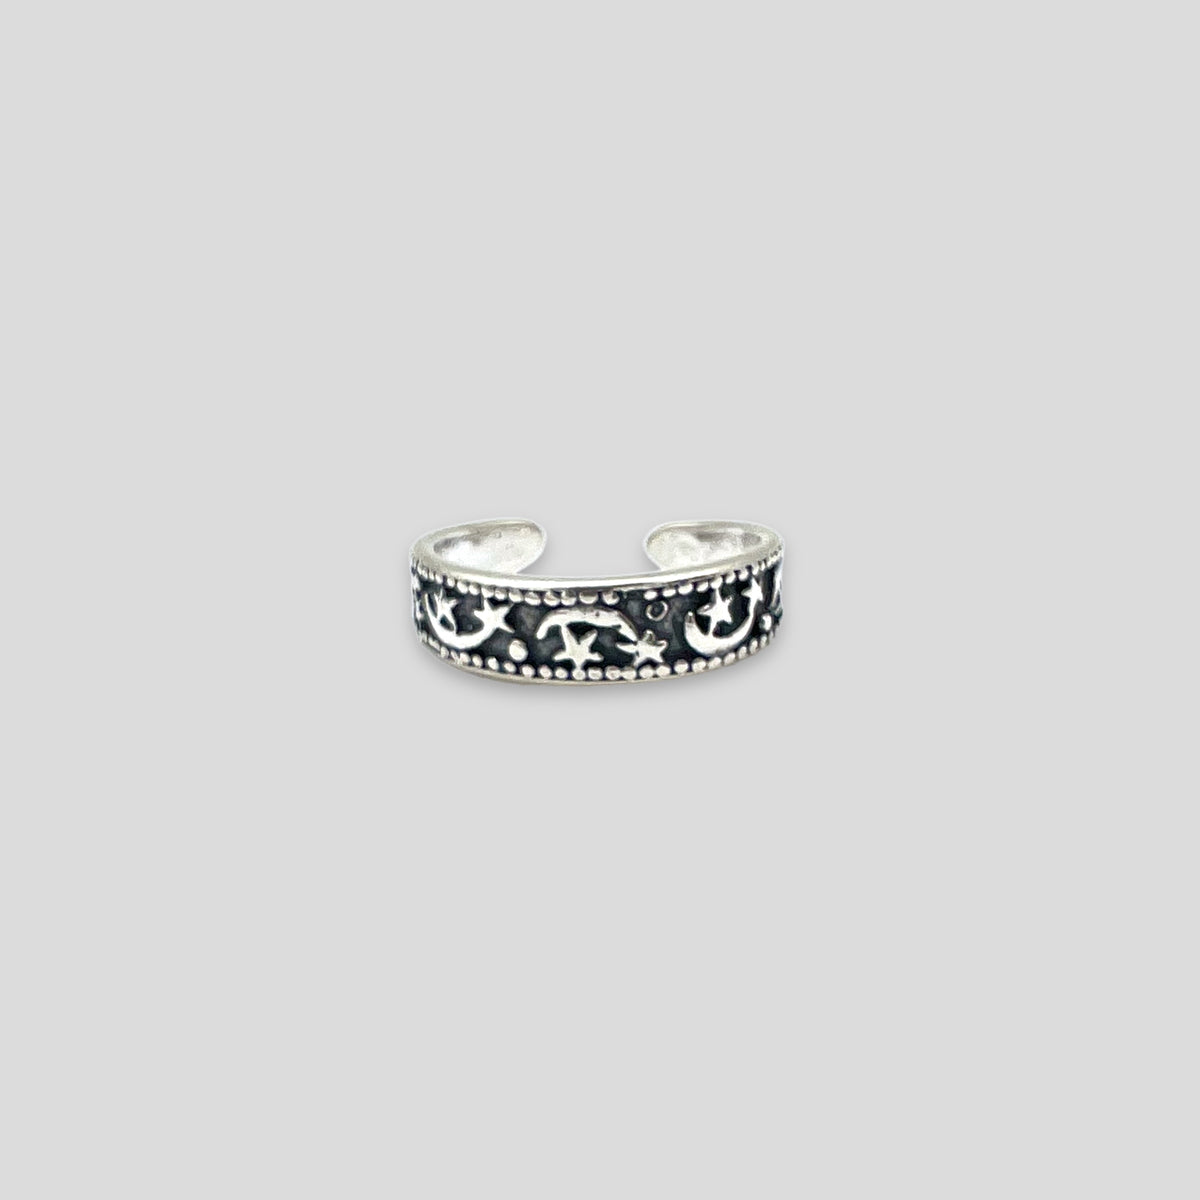 Shooting Stars Sterling Silver Toe Ring